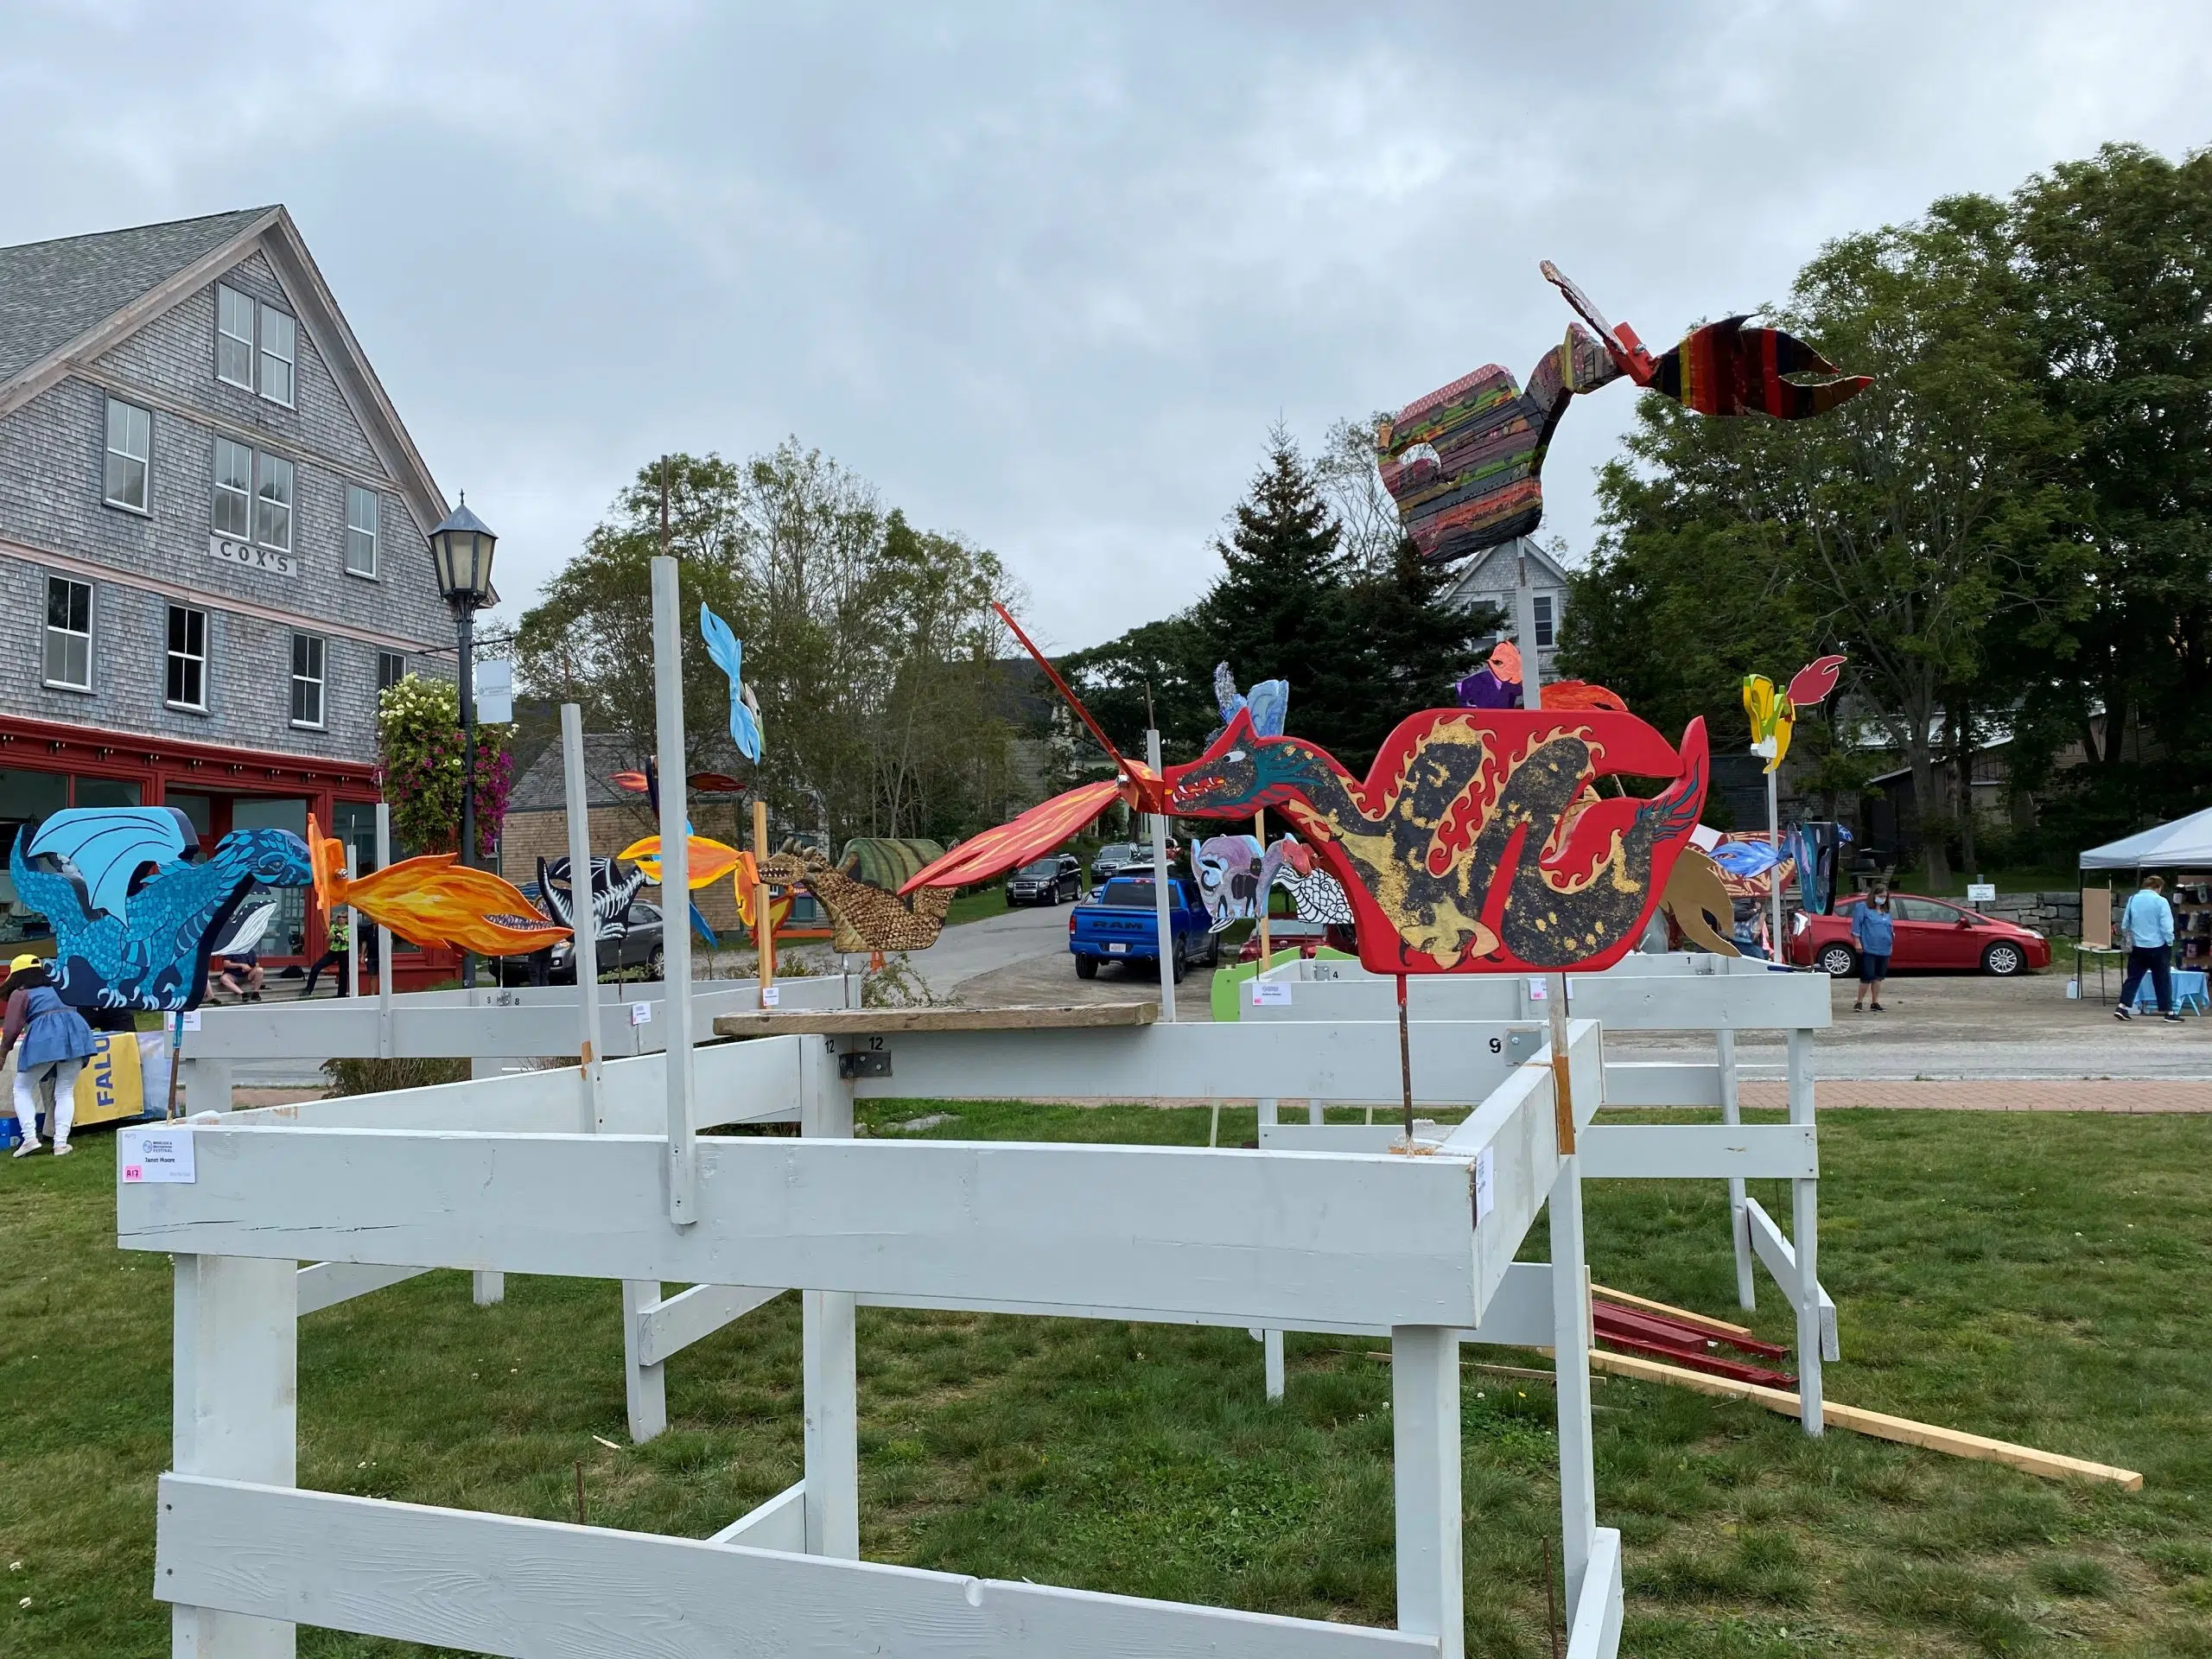 22nd annual Whirligig & Weathervane Festival this weekend in Shelburne